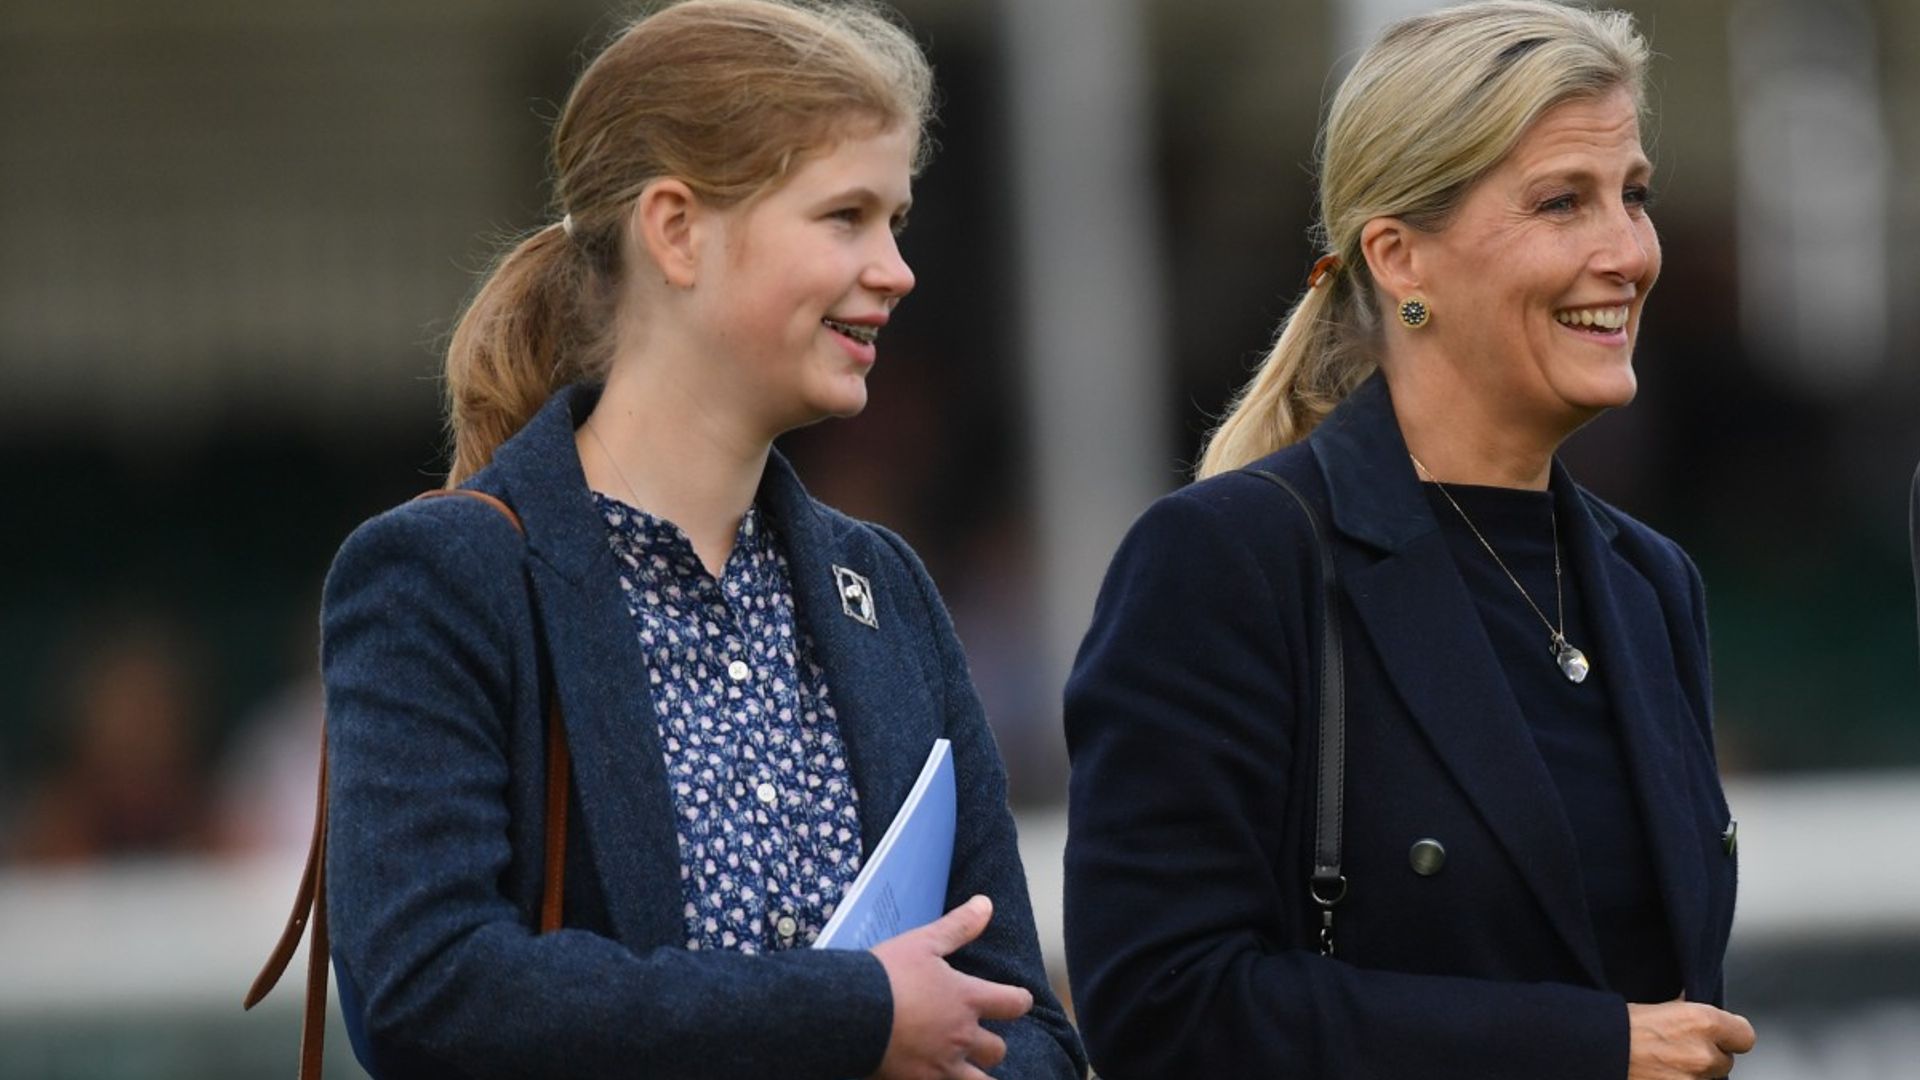 Lady Louise Windsor and Sophie, Countess of Wessex supported Zara Tindall at Burghley Horse Trials